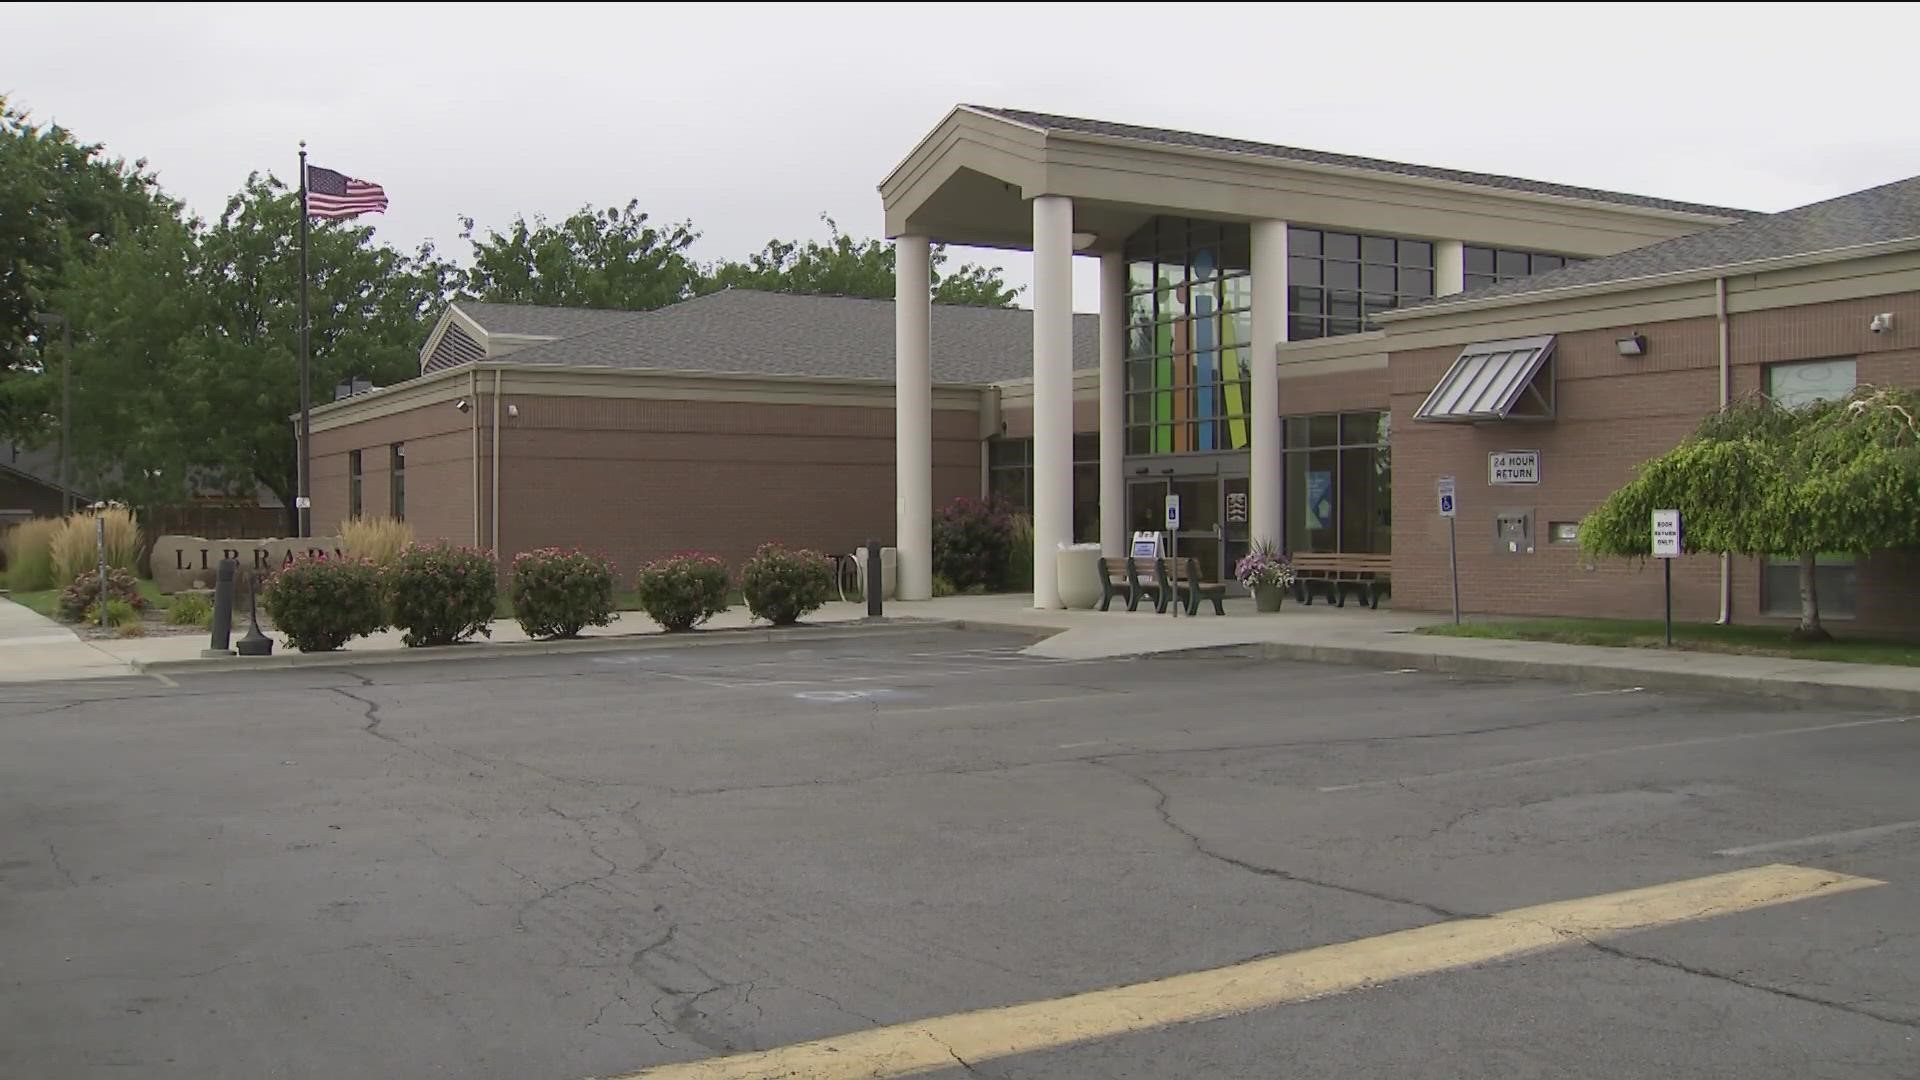 ‘The Concerned Citizens of Meridian’ filed a petition to dissolve the Meridian Library District over claims of sexual indoctrination of children.